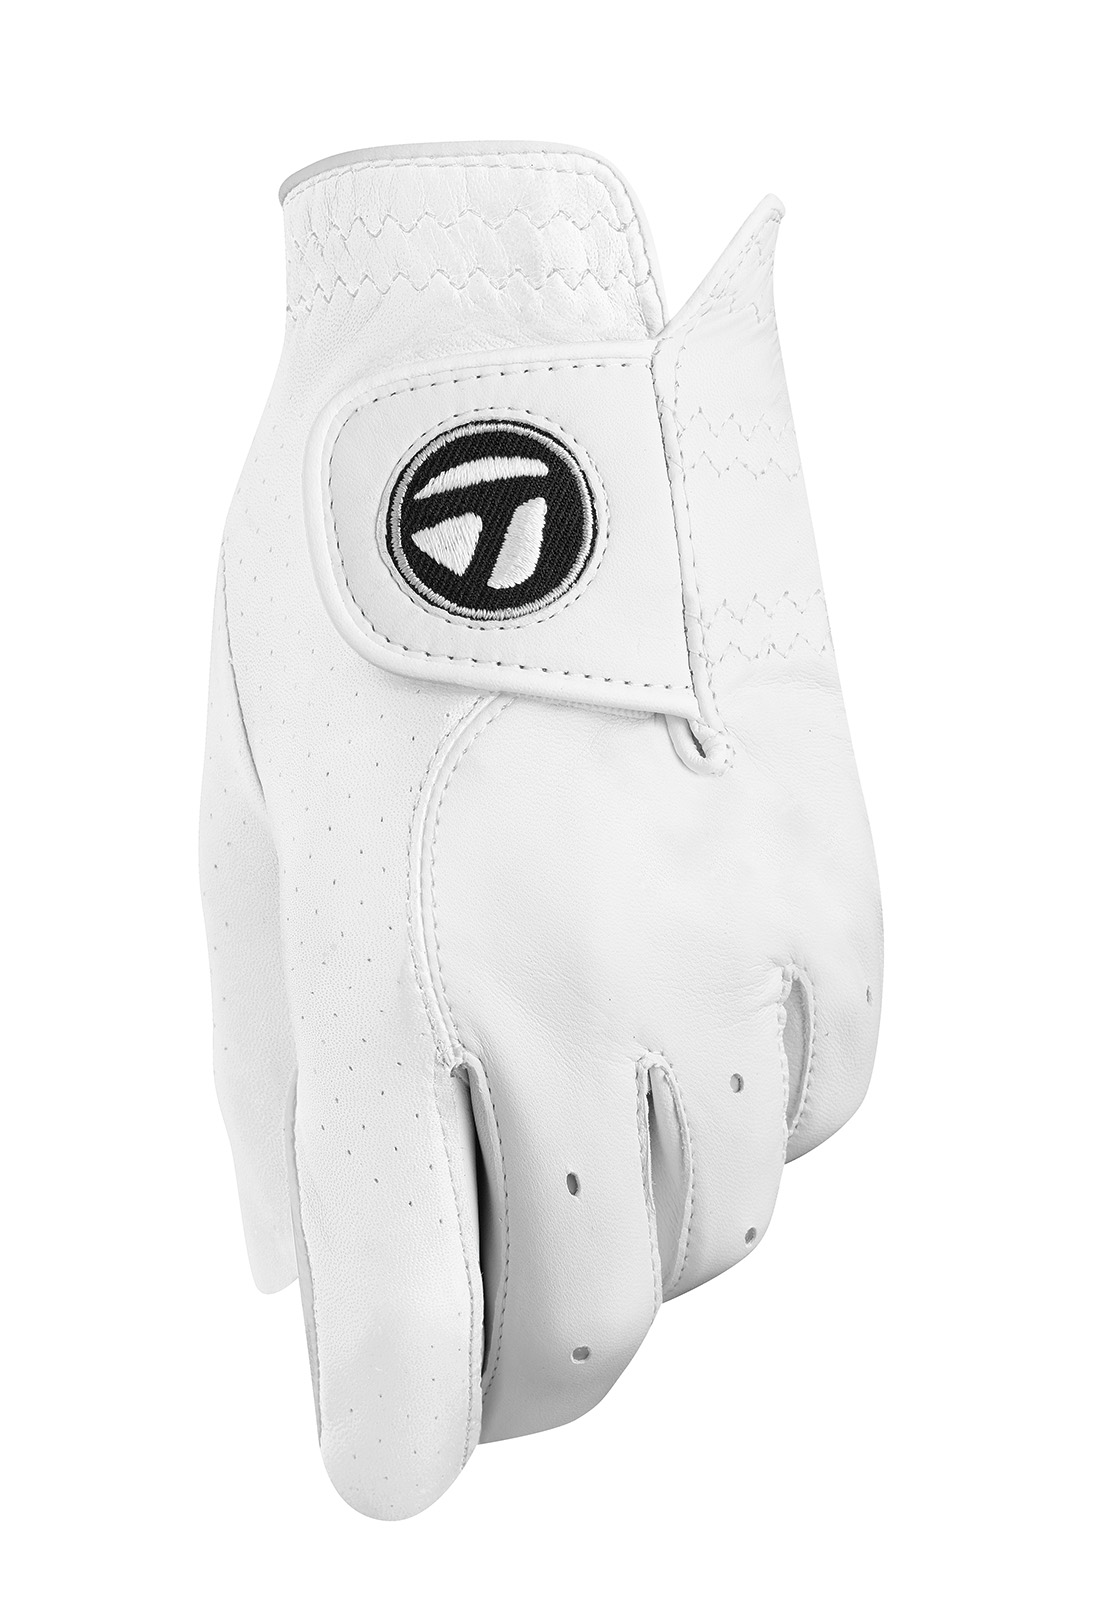 TaylorMade TP Glove Left Hand Cadet Large - image 1 of 3